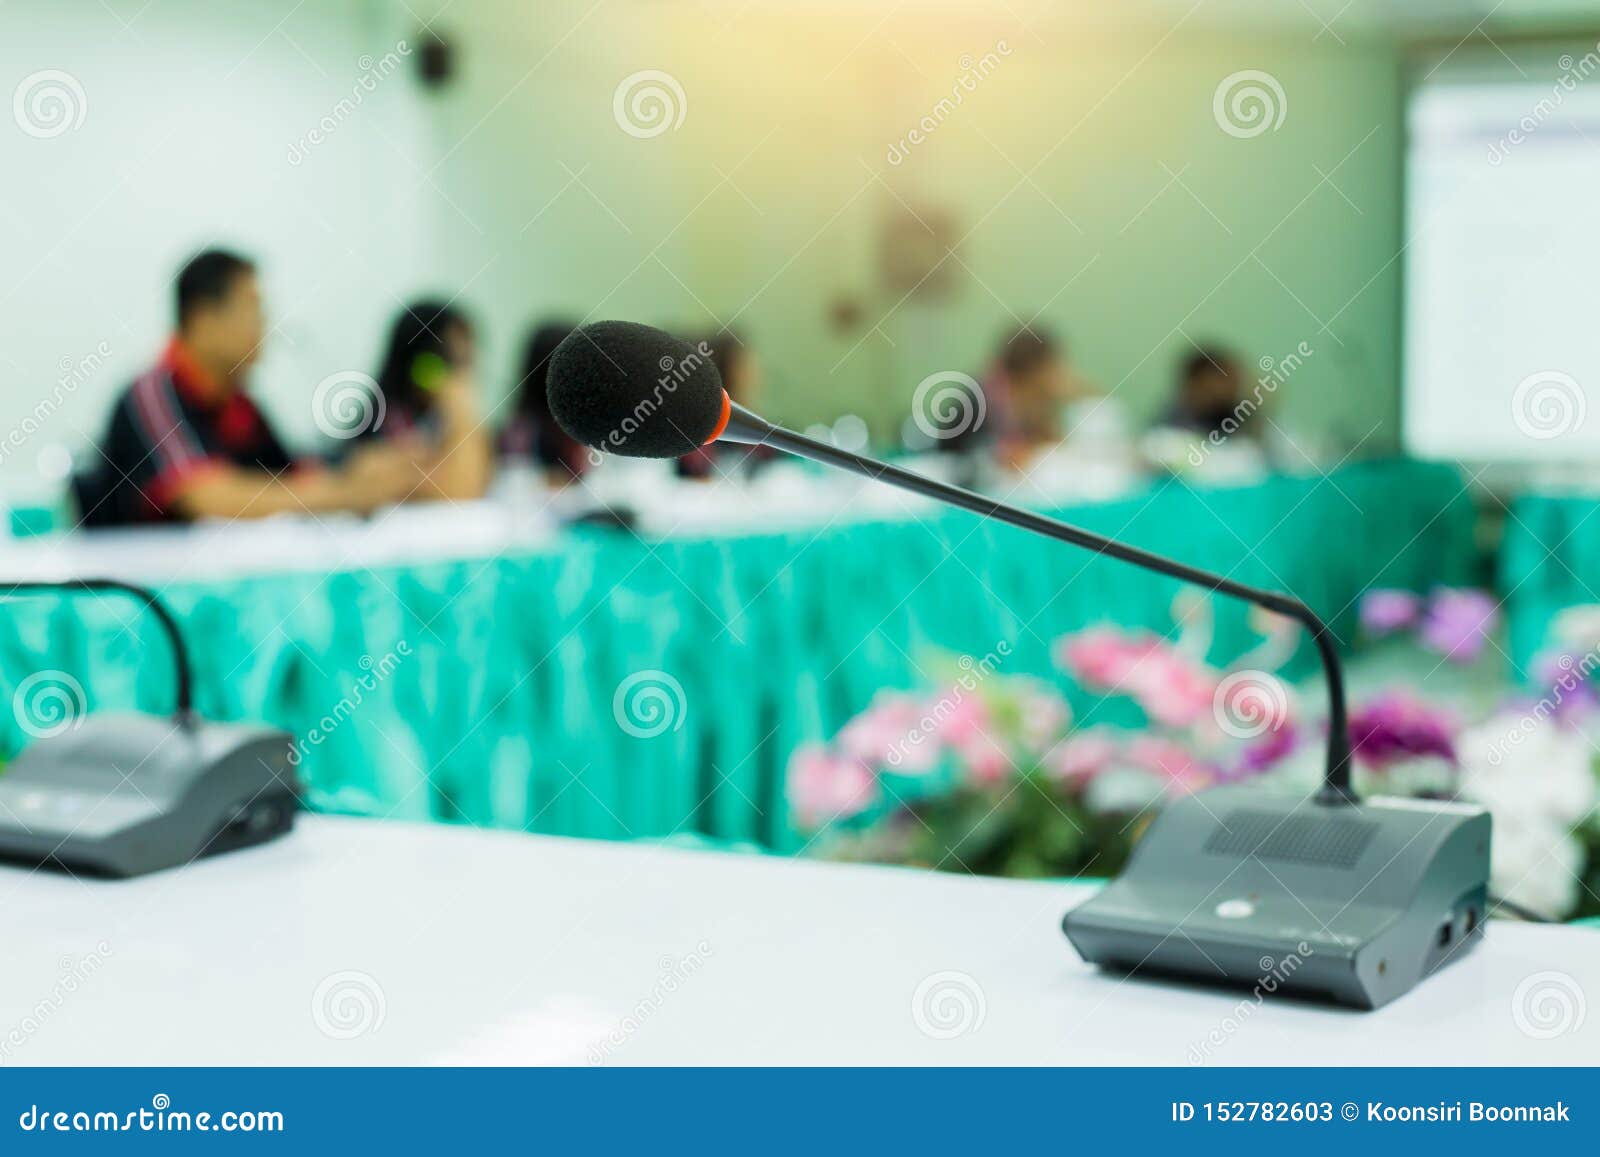 Desktop Wireless Conference Microphones With Blurry Business Group